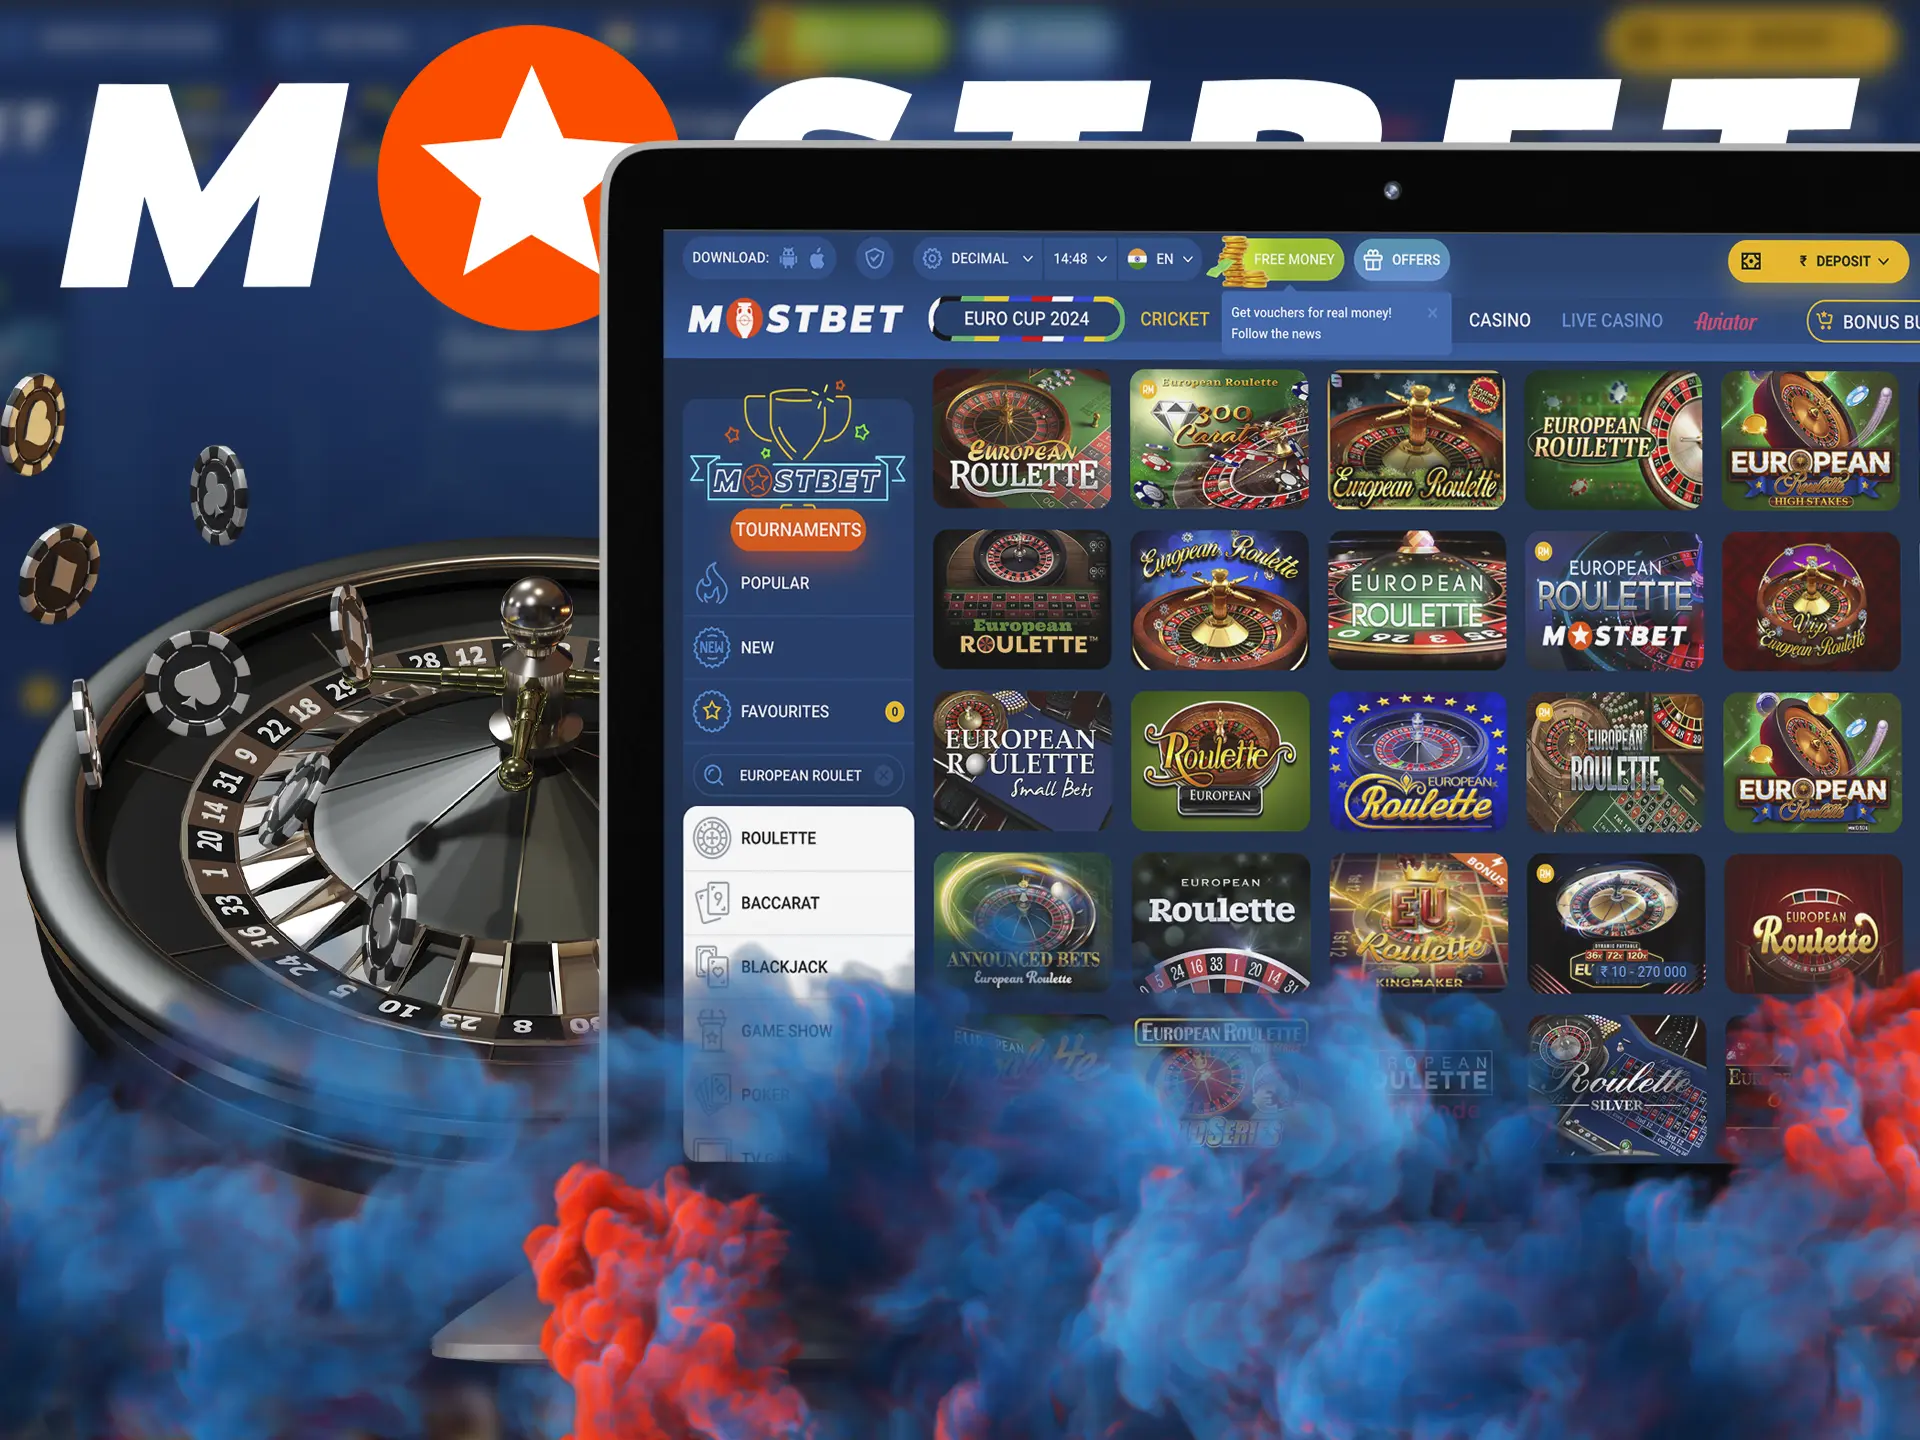 Enjoy the emotion of winning at European Roulette from Mostbet Casino.